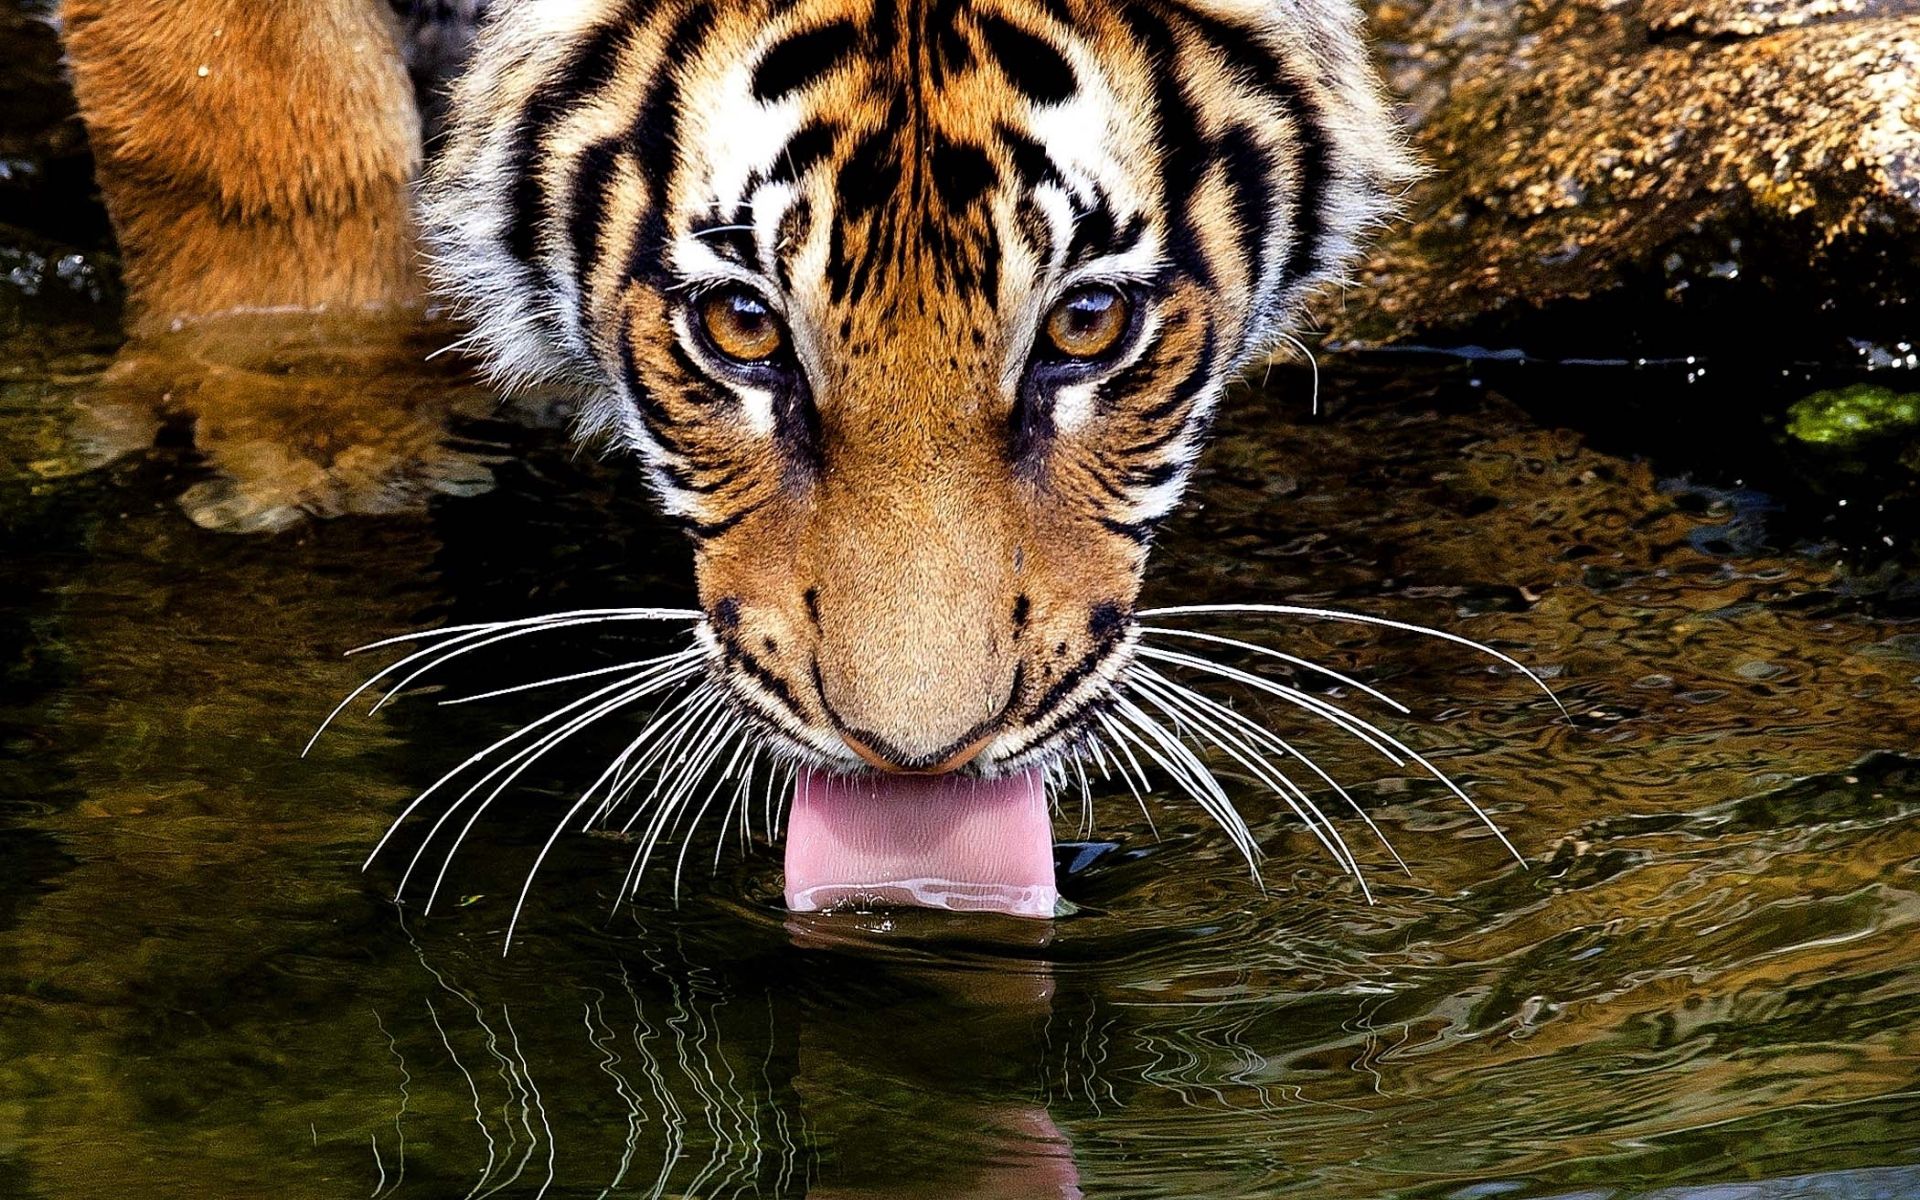 tiger, animals, water, muzzle, drink, language, tongue, thirst High Definition image